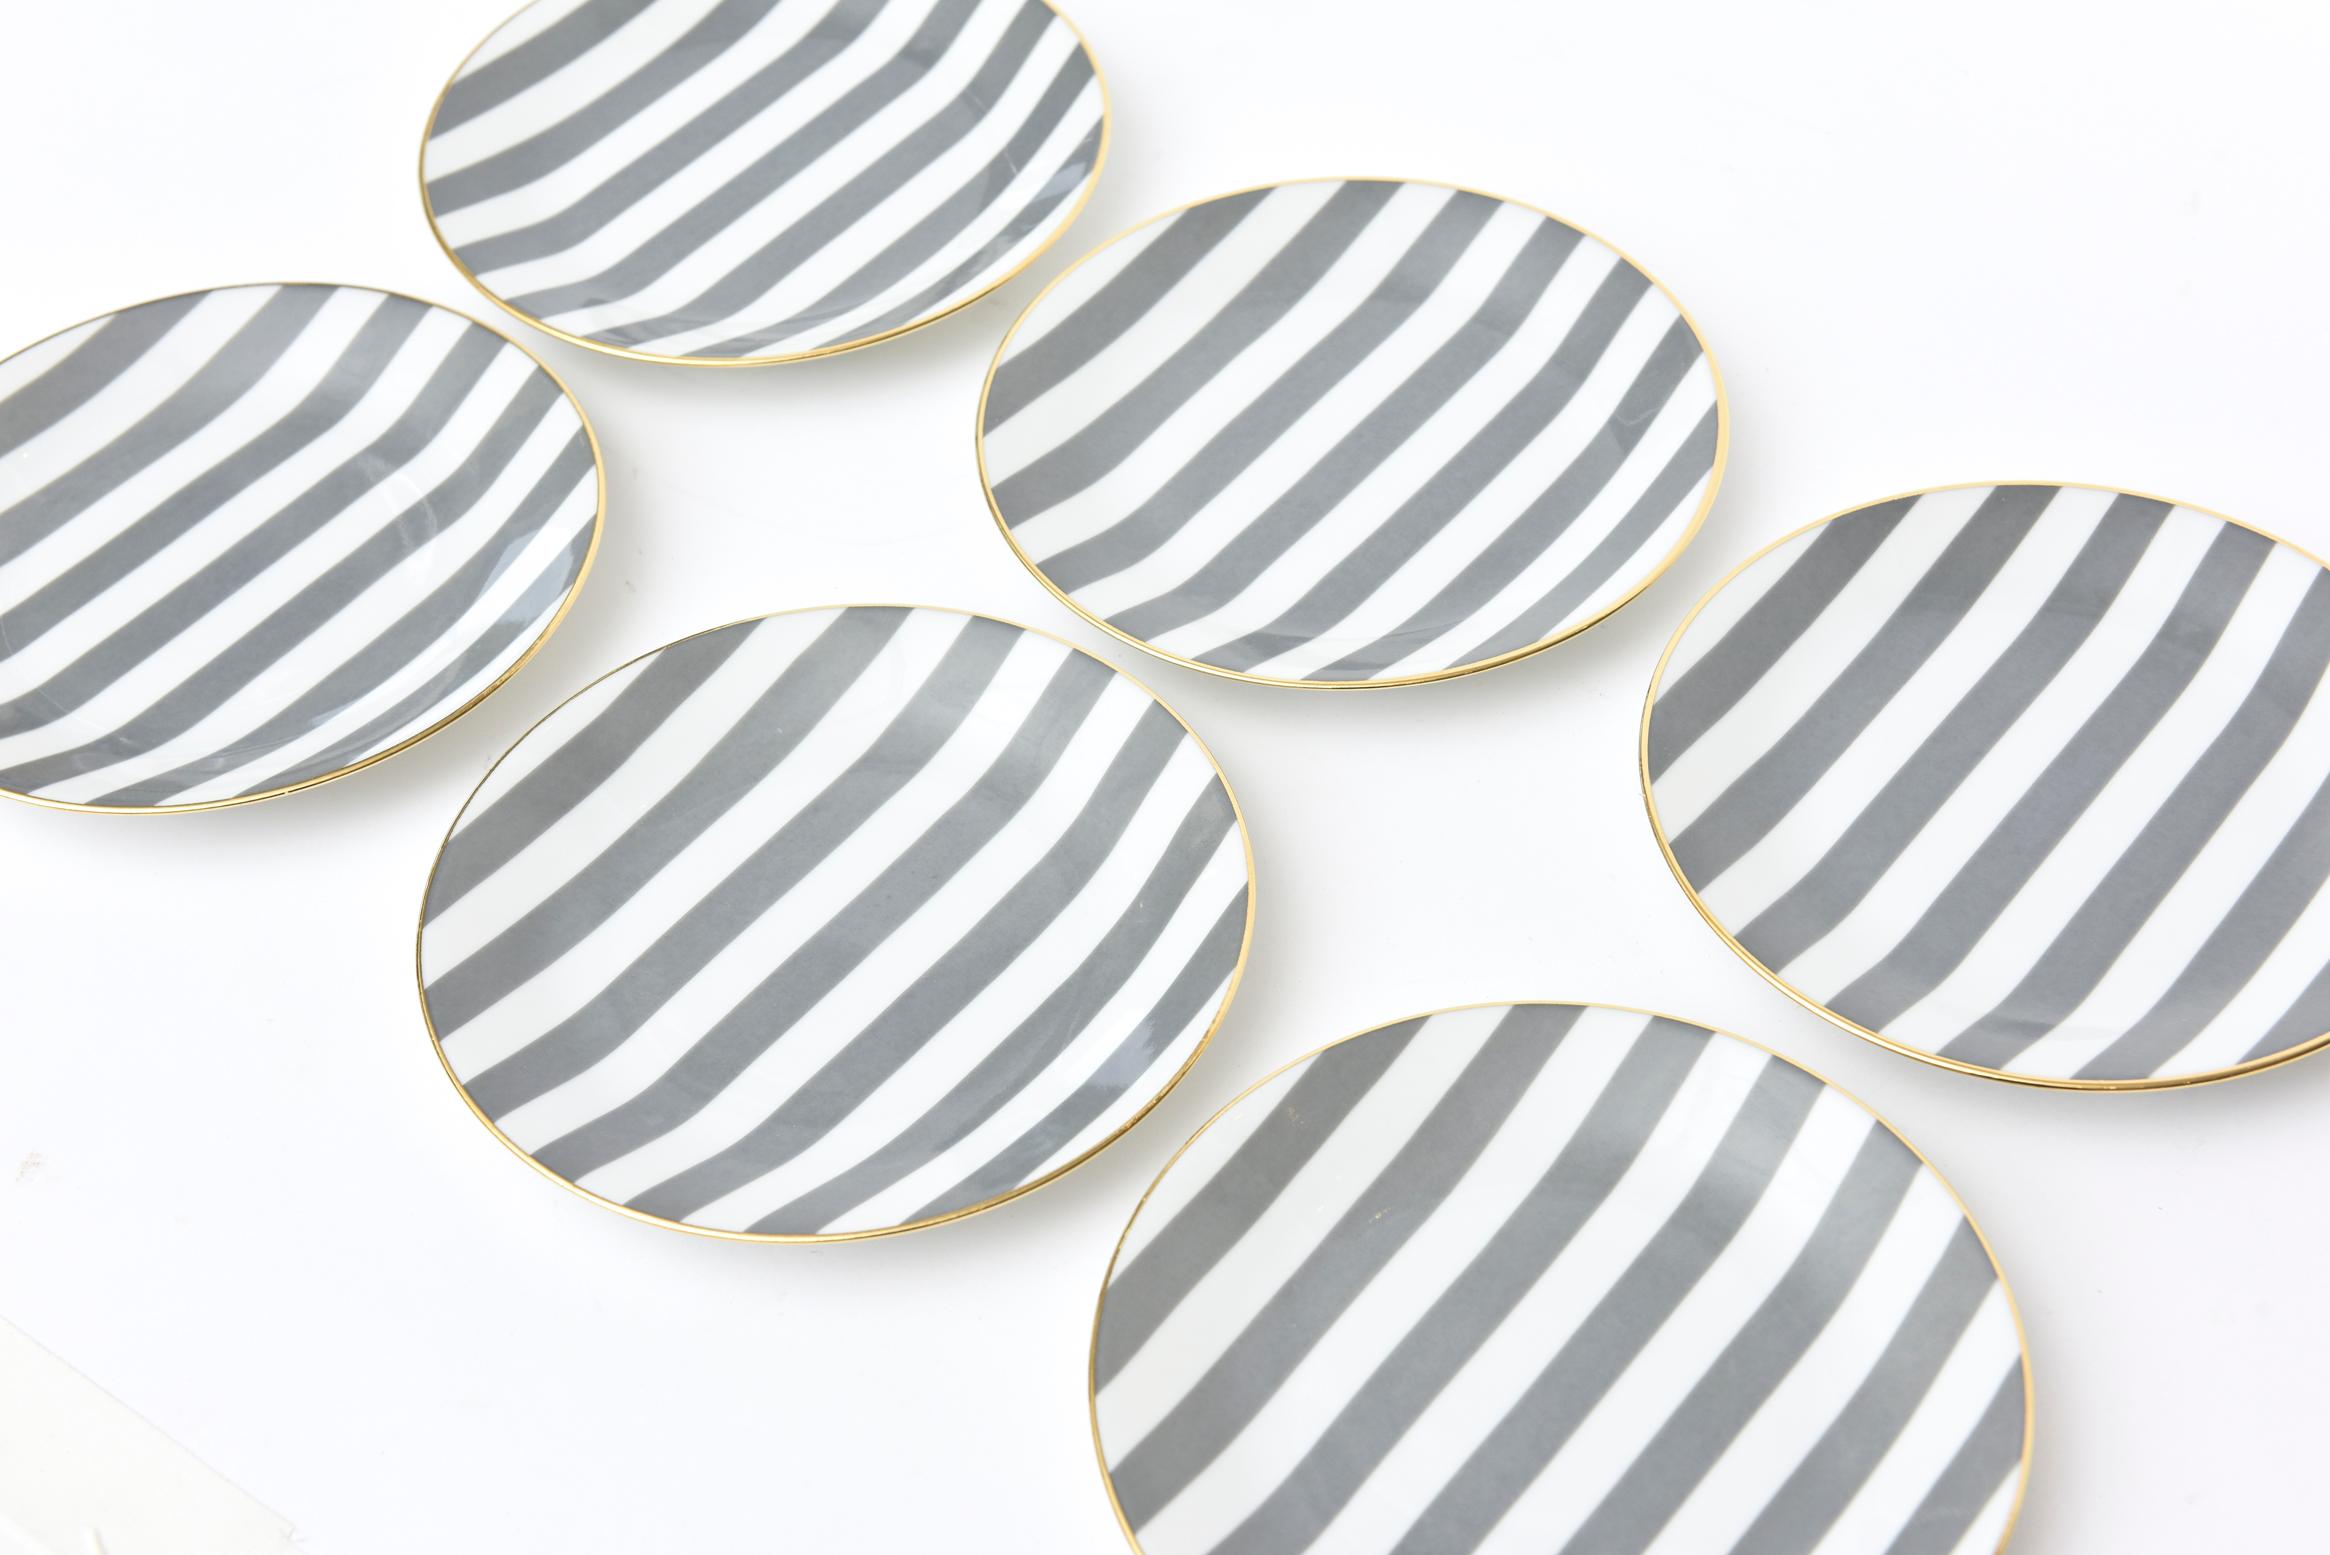 These chic and elegant set of 6 gray and white striped desert and or appetizer Limoges porcelain plates are rimmed with gold. They are signed and numbered and were made exclusively for Neiman Marcus in the 1970s by Philippe Deshoulières. Hand